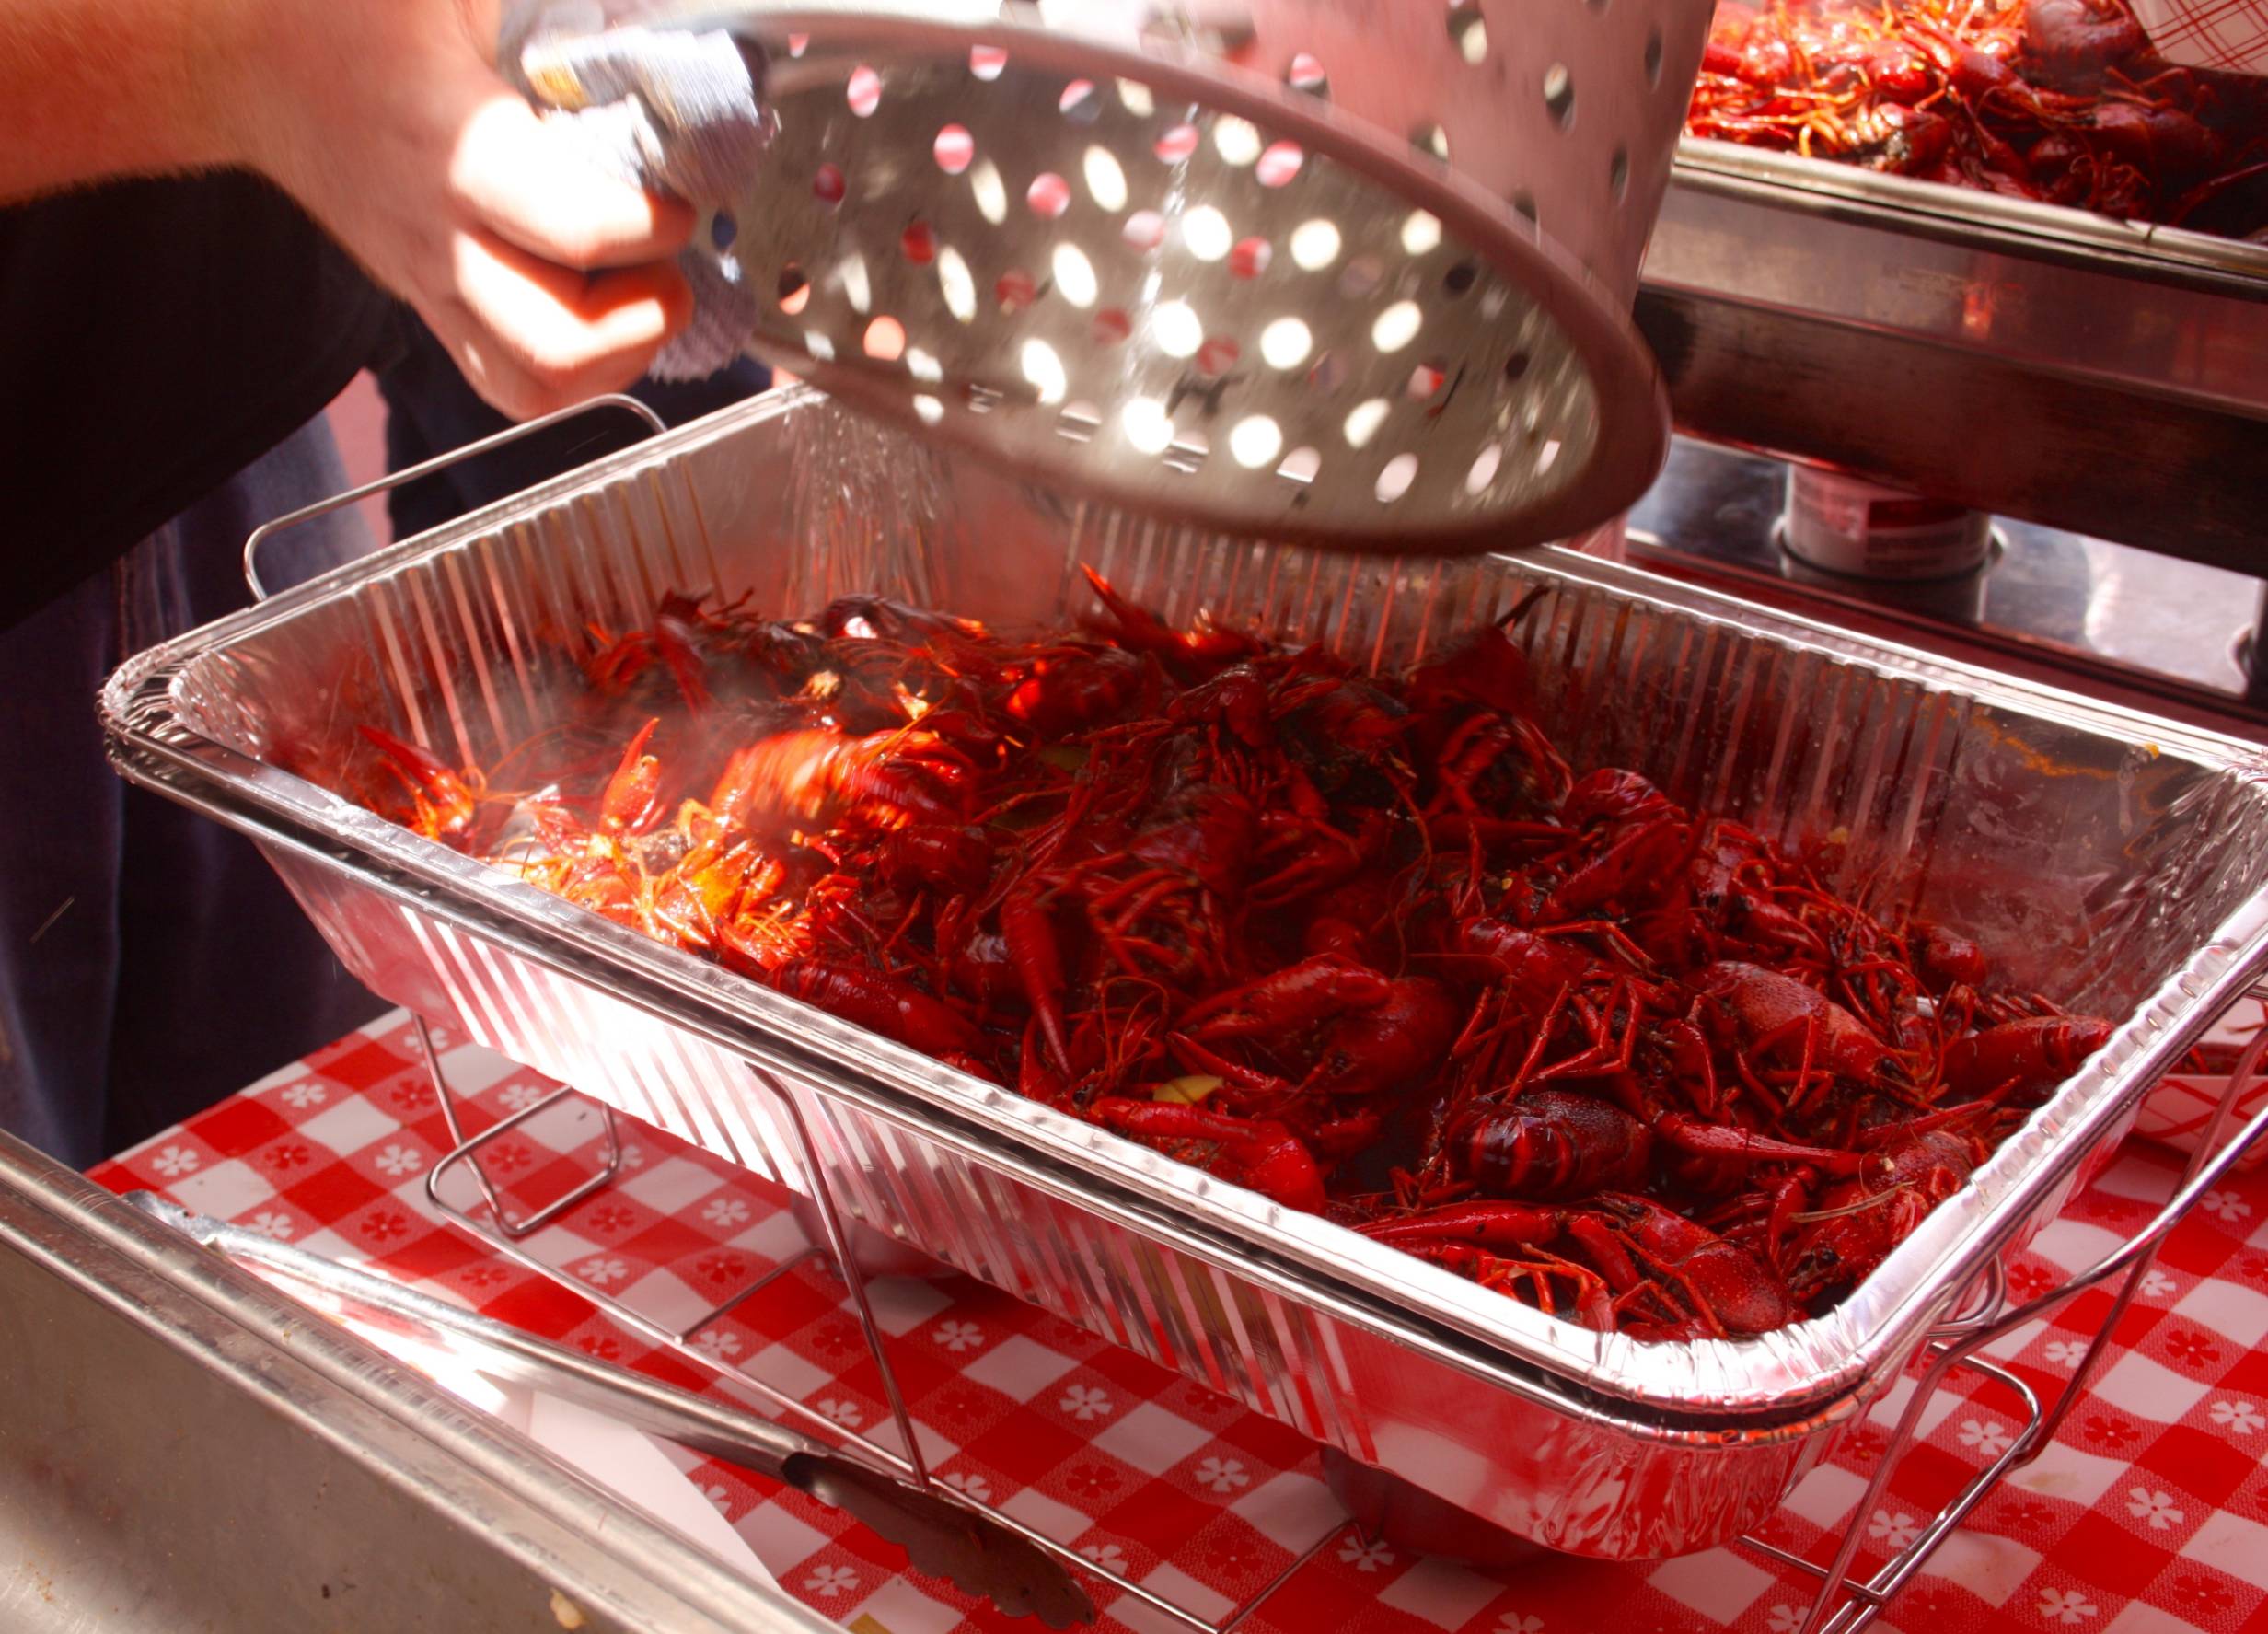 A taste of Louisiana at Crane Alley’s Crawfish Boil 2018